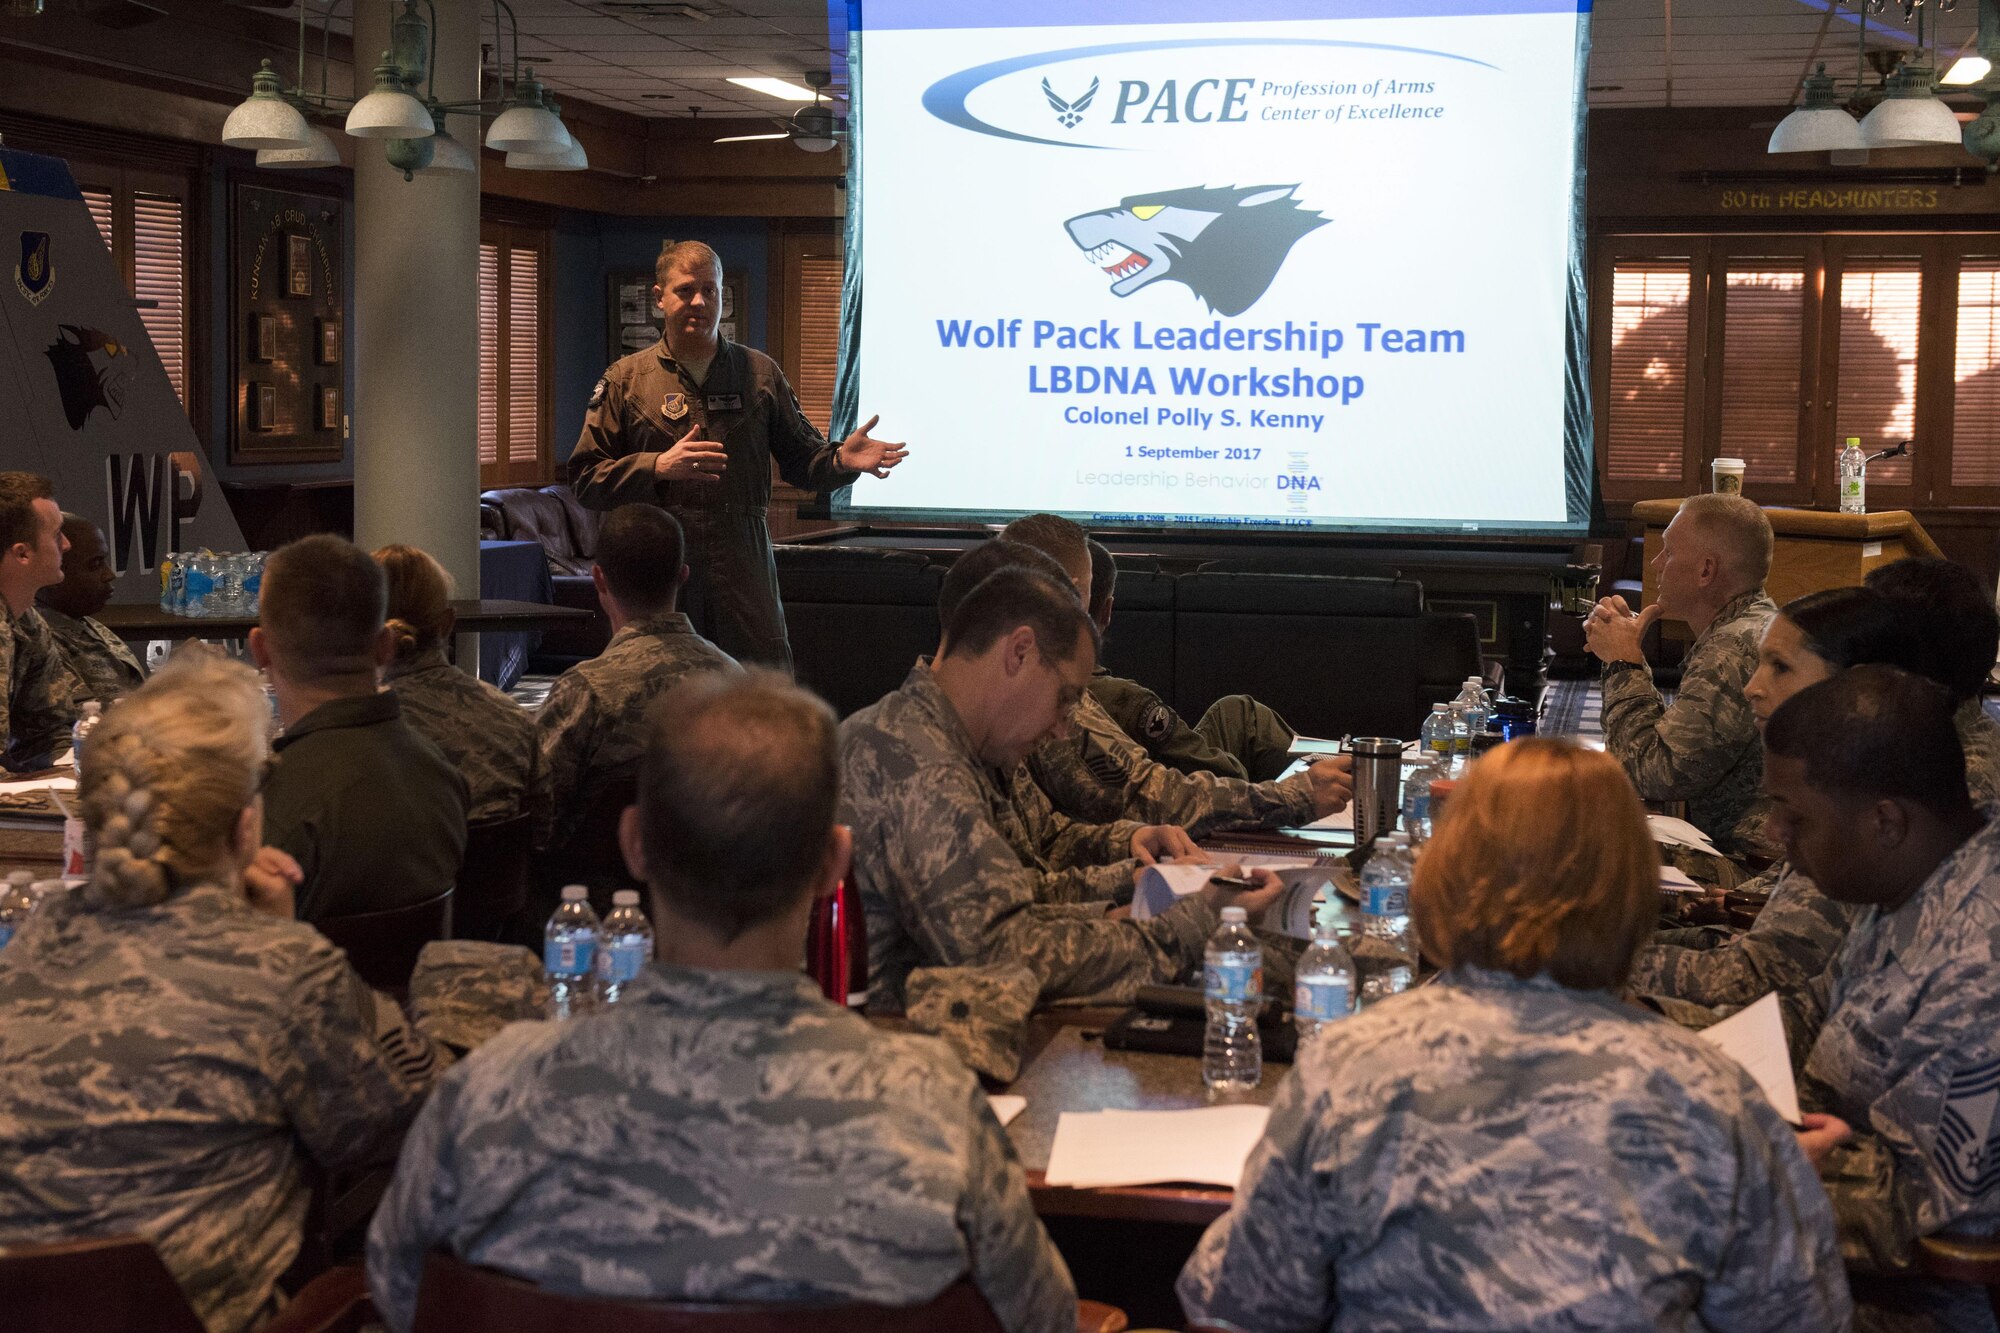 U.S. Air Force Col. David Shoemaker, 8th Fighter Wing commander, addresses participants during the Leadership Behavior DNA workshop at Kunsan Air Base, Republic of Korea, Sep. 1, 2017. The workshop, hosted by the Profession of Arms Center of Excellence, allowed participants to learn about the different traits and factors involved with interpersonal communications and leadership decision-making. (U.S. Air Force photo by Senior Airman Michael Hunsaker)